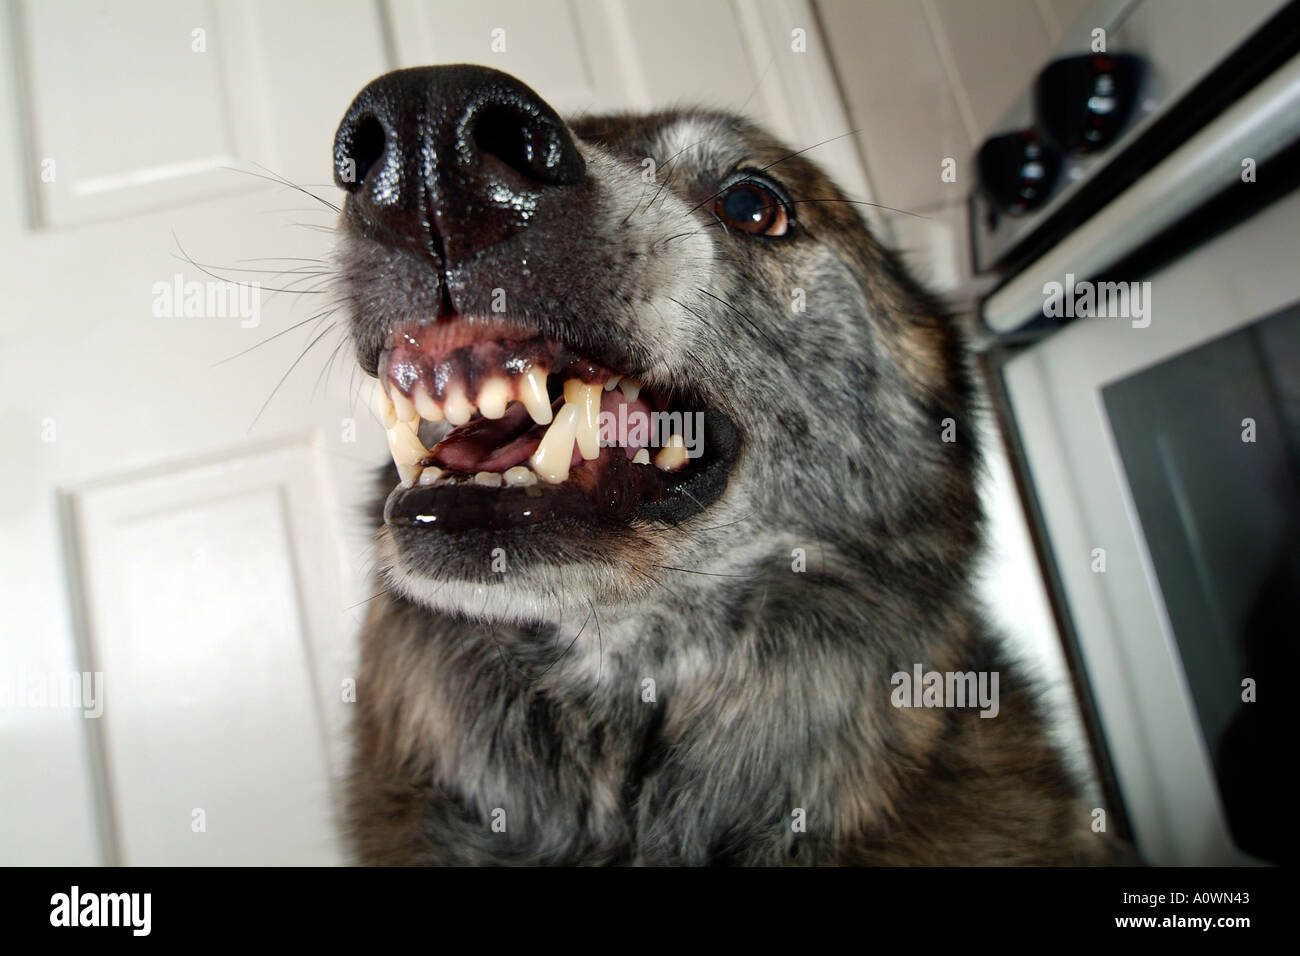 Dog snarling teeth ready to bite Stock Photo